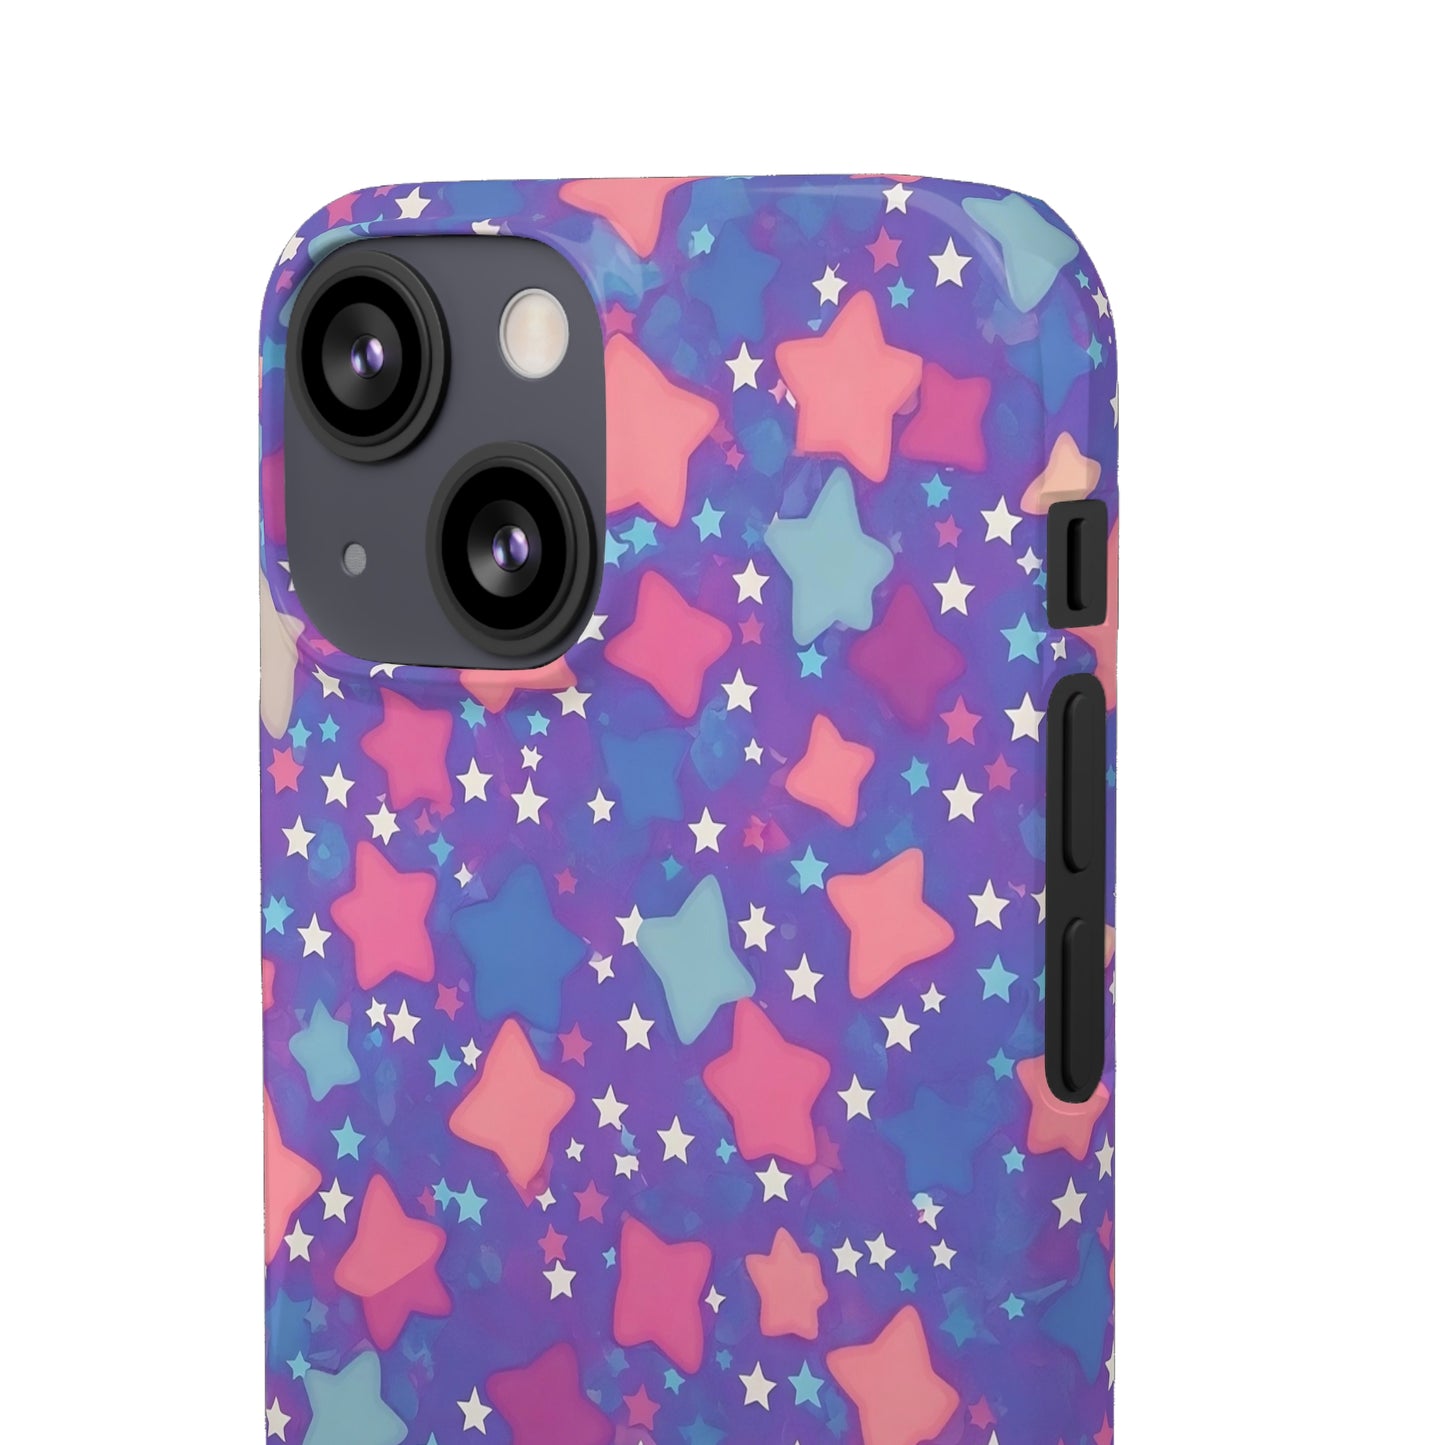 "Cosmic Sparkle" iPhone Snap Cases